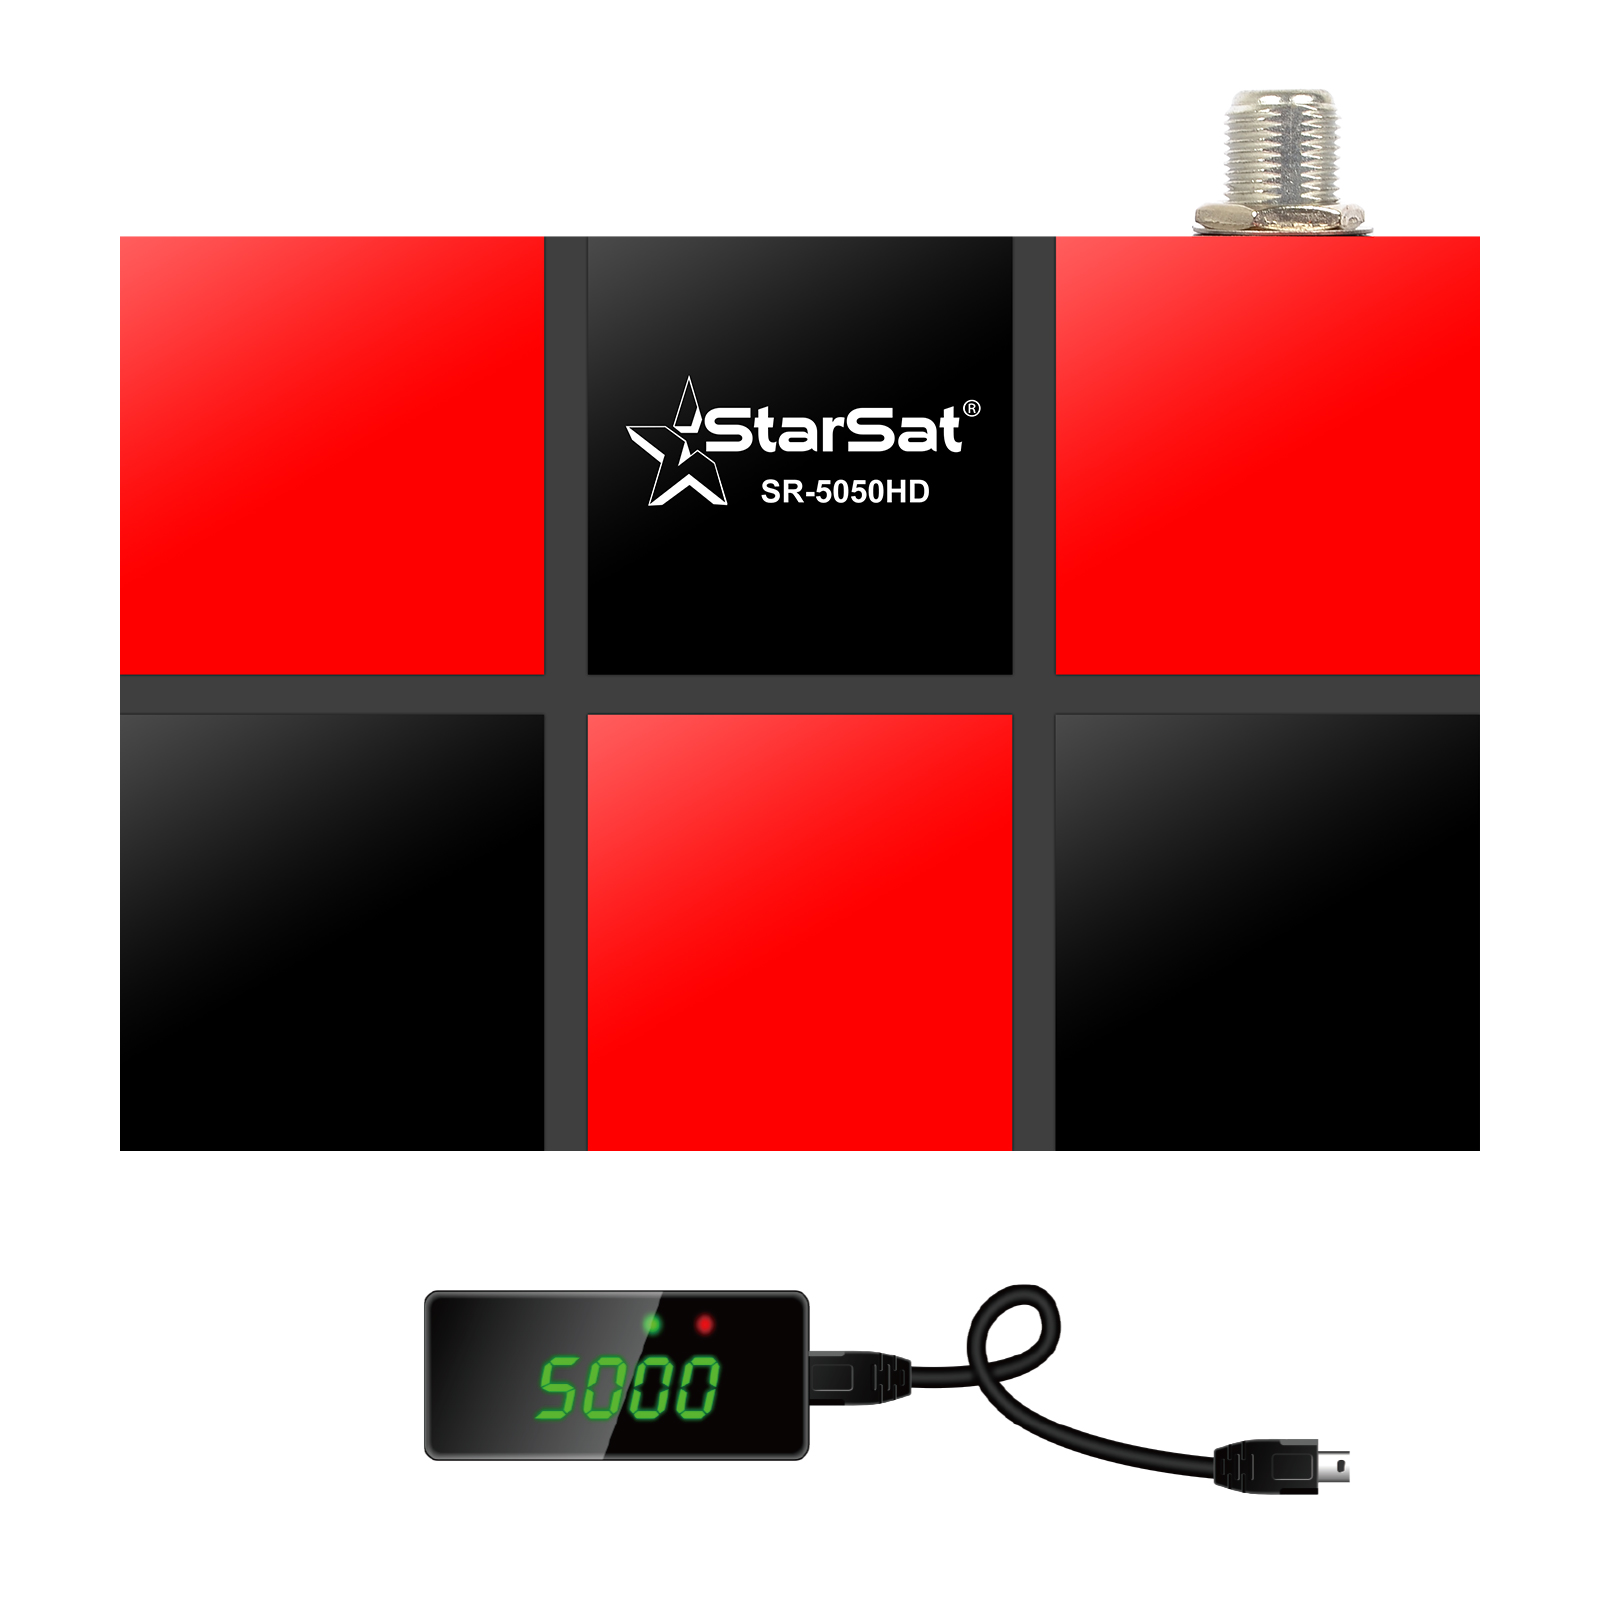 StarSat SR-5050HD Full HD with 1 year service, 2xUSB, HDMI, EPG, MPEG4, Blind Scan, YouTube, PVR, DVBS2, 4G & WiFi Supported (WiFi device not include)